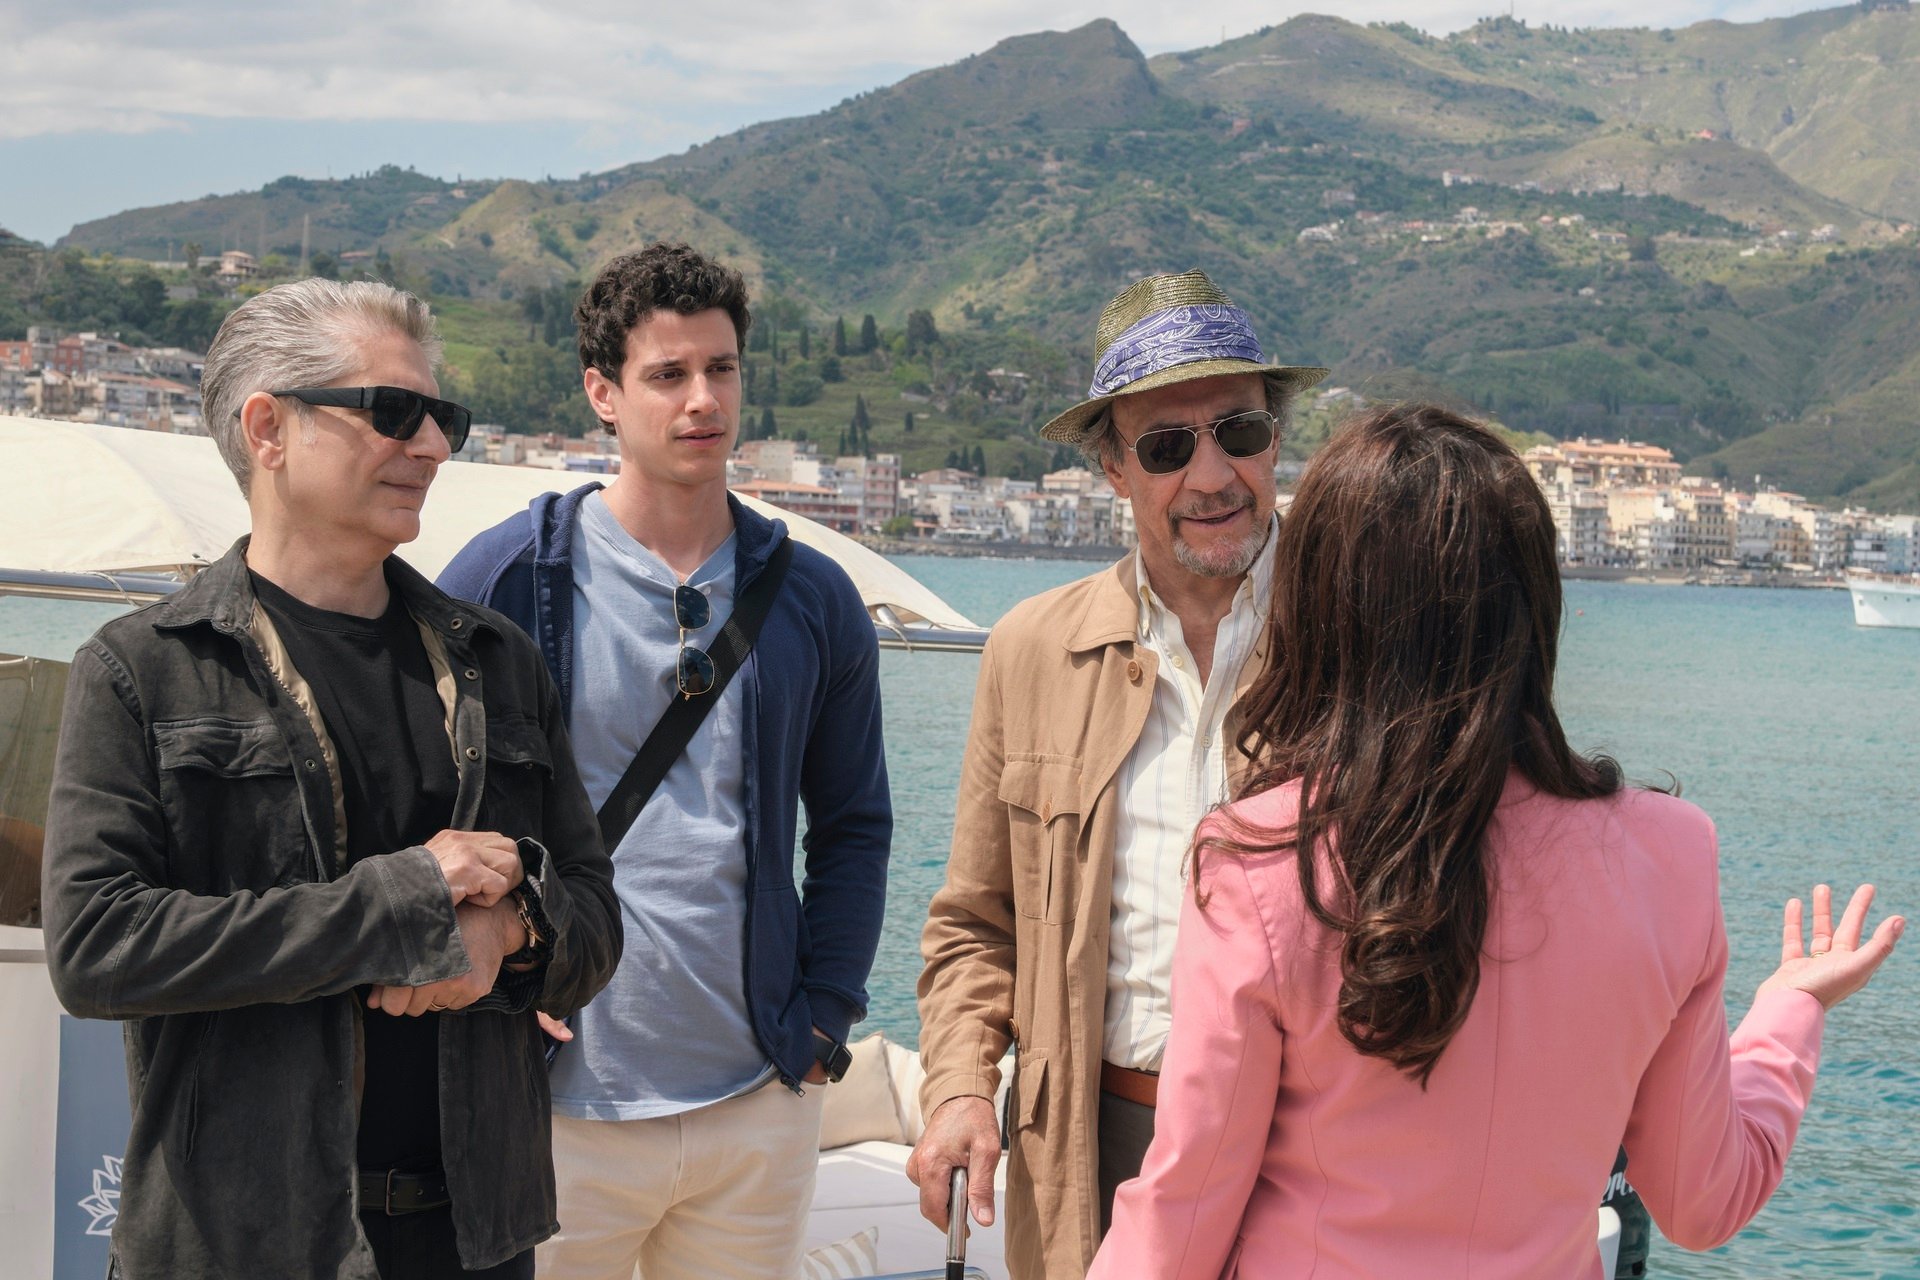 'The White Lotus: Sicily' Season 2 cast members Michael Imperioli, Adam DiMarco, and F. Murray Abraham talking to the resort manager